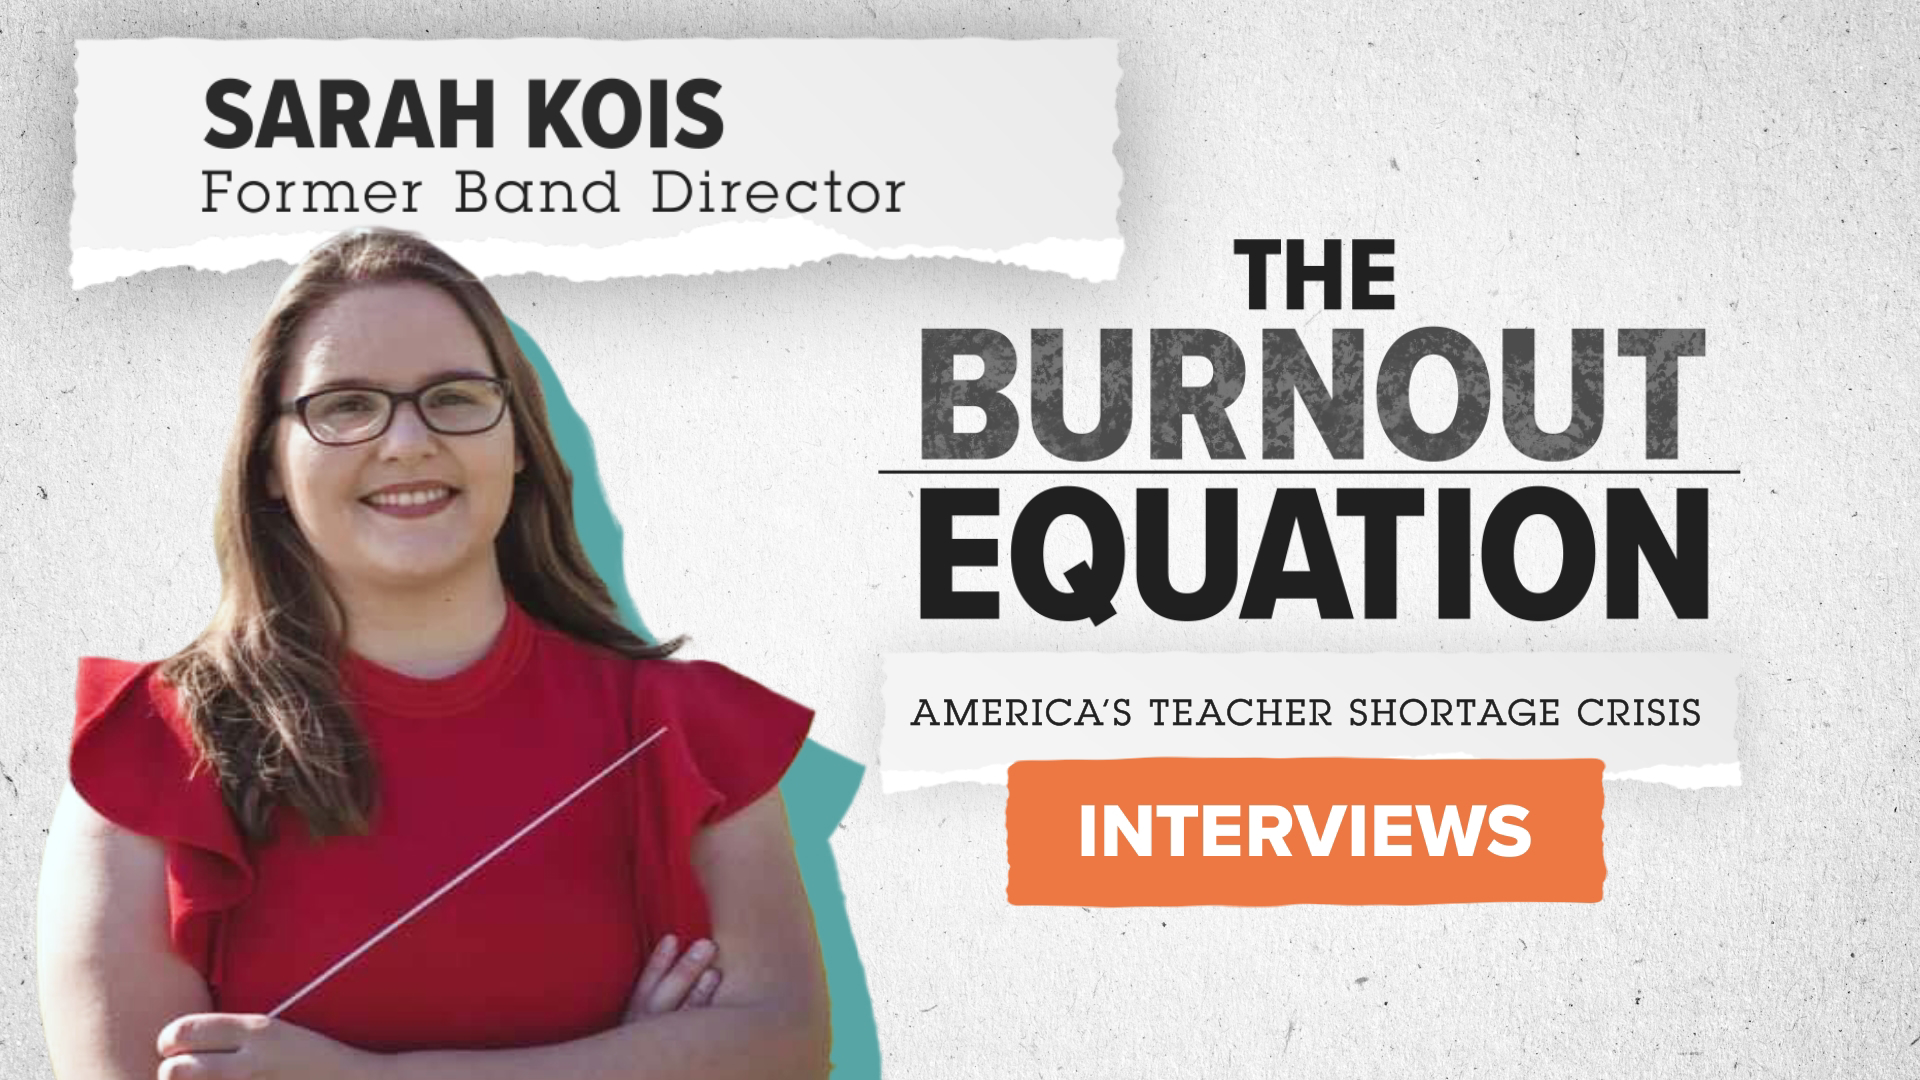 Former band director Sarah Kois speaks with VERIFY about how burnout in her job as band director led her to leaving the teaching profession for good.